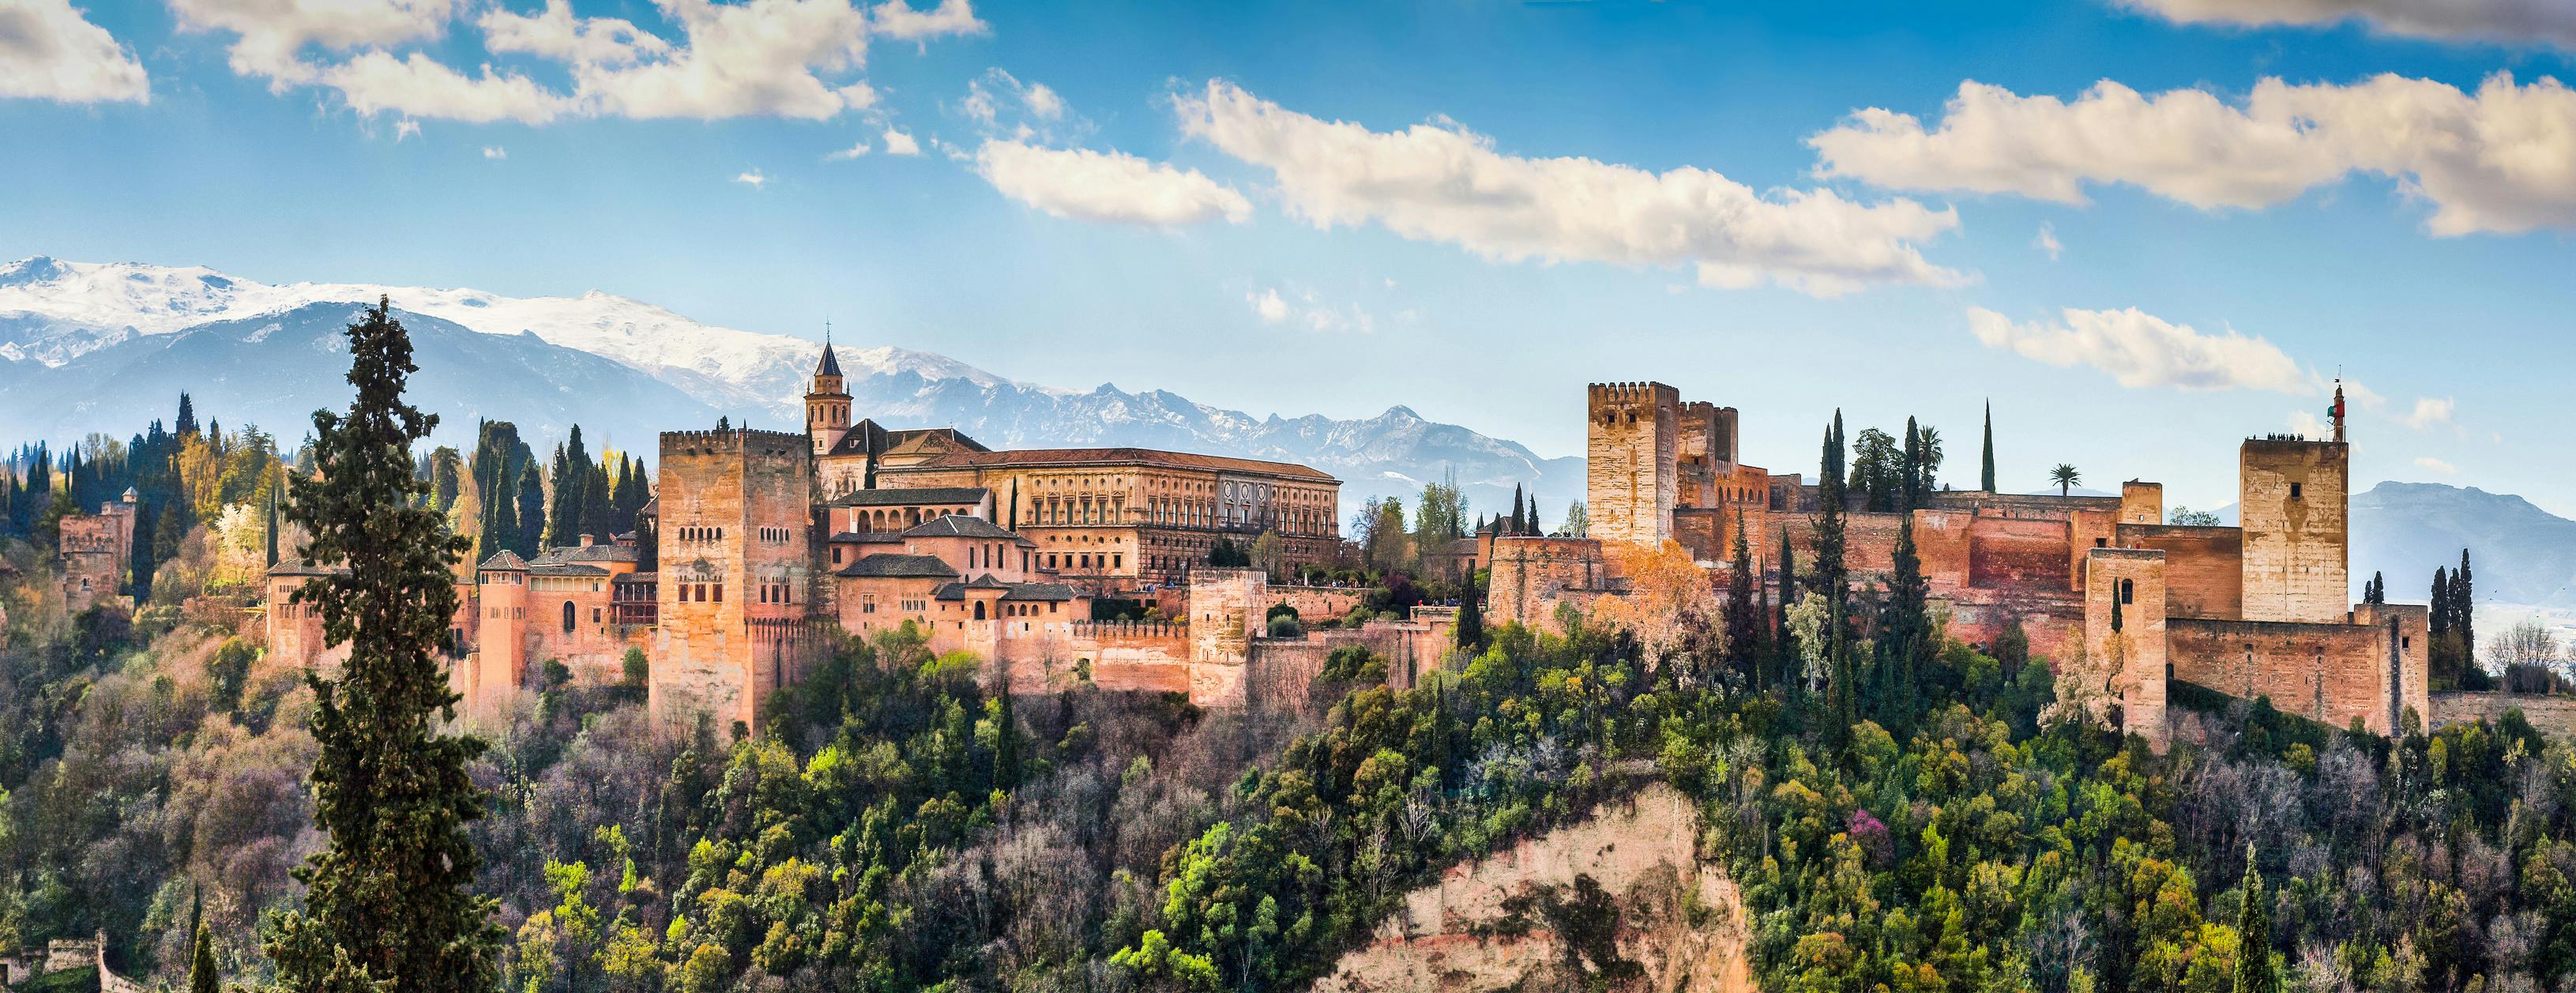 Virtual tour of Alhambra from home Musement